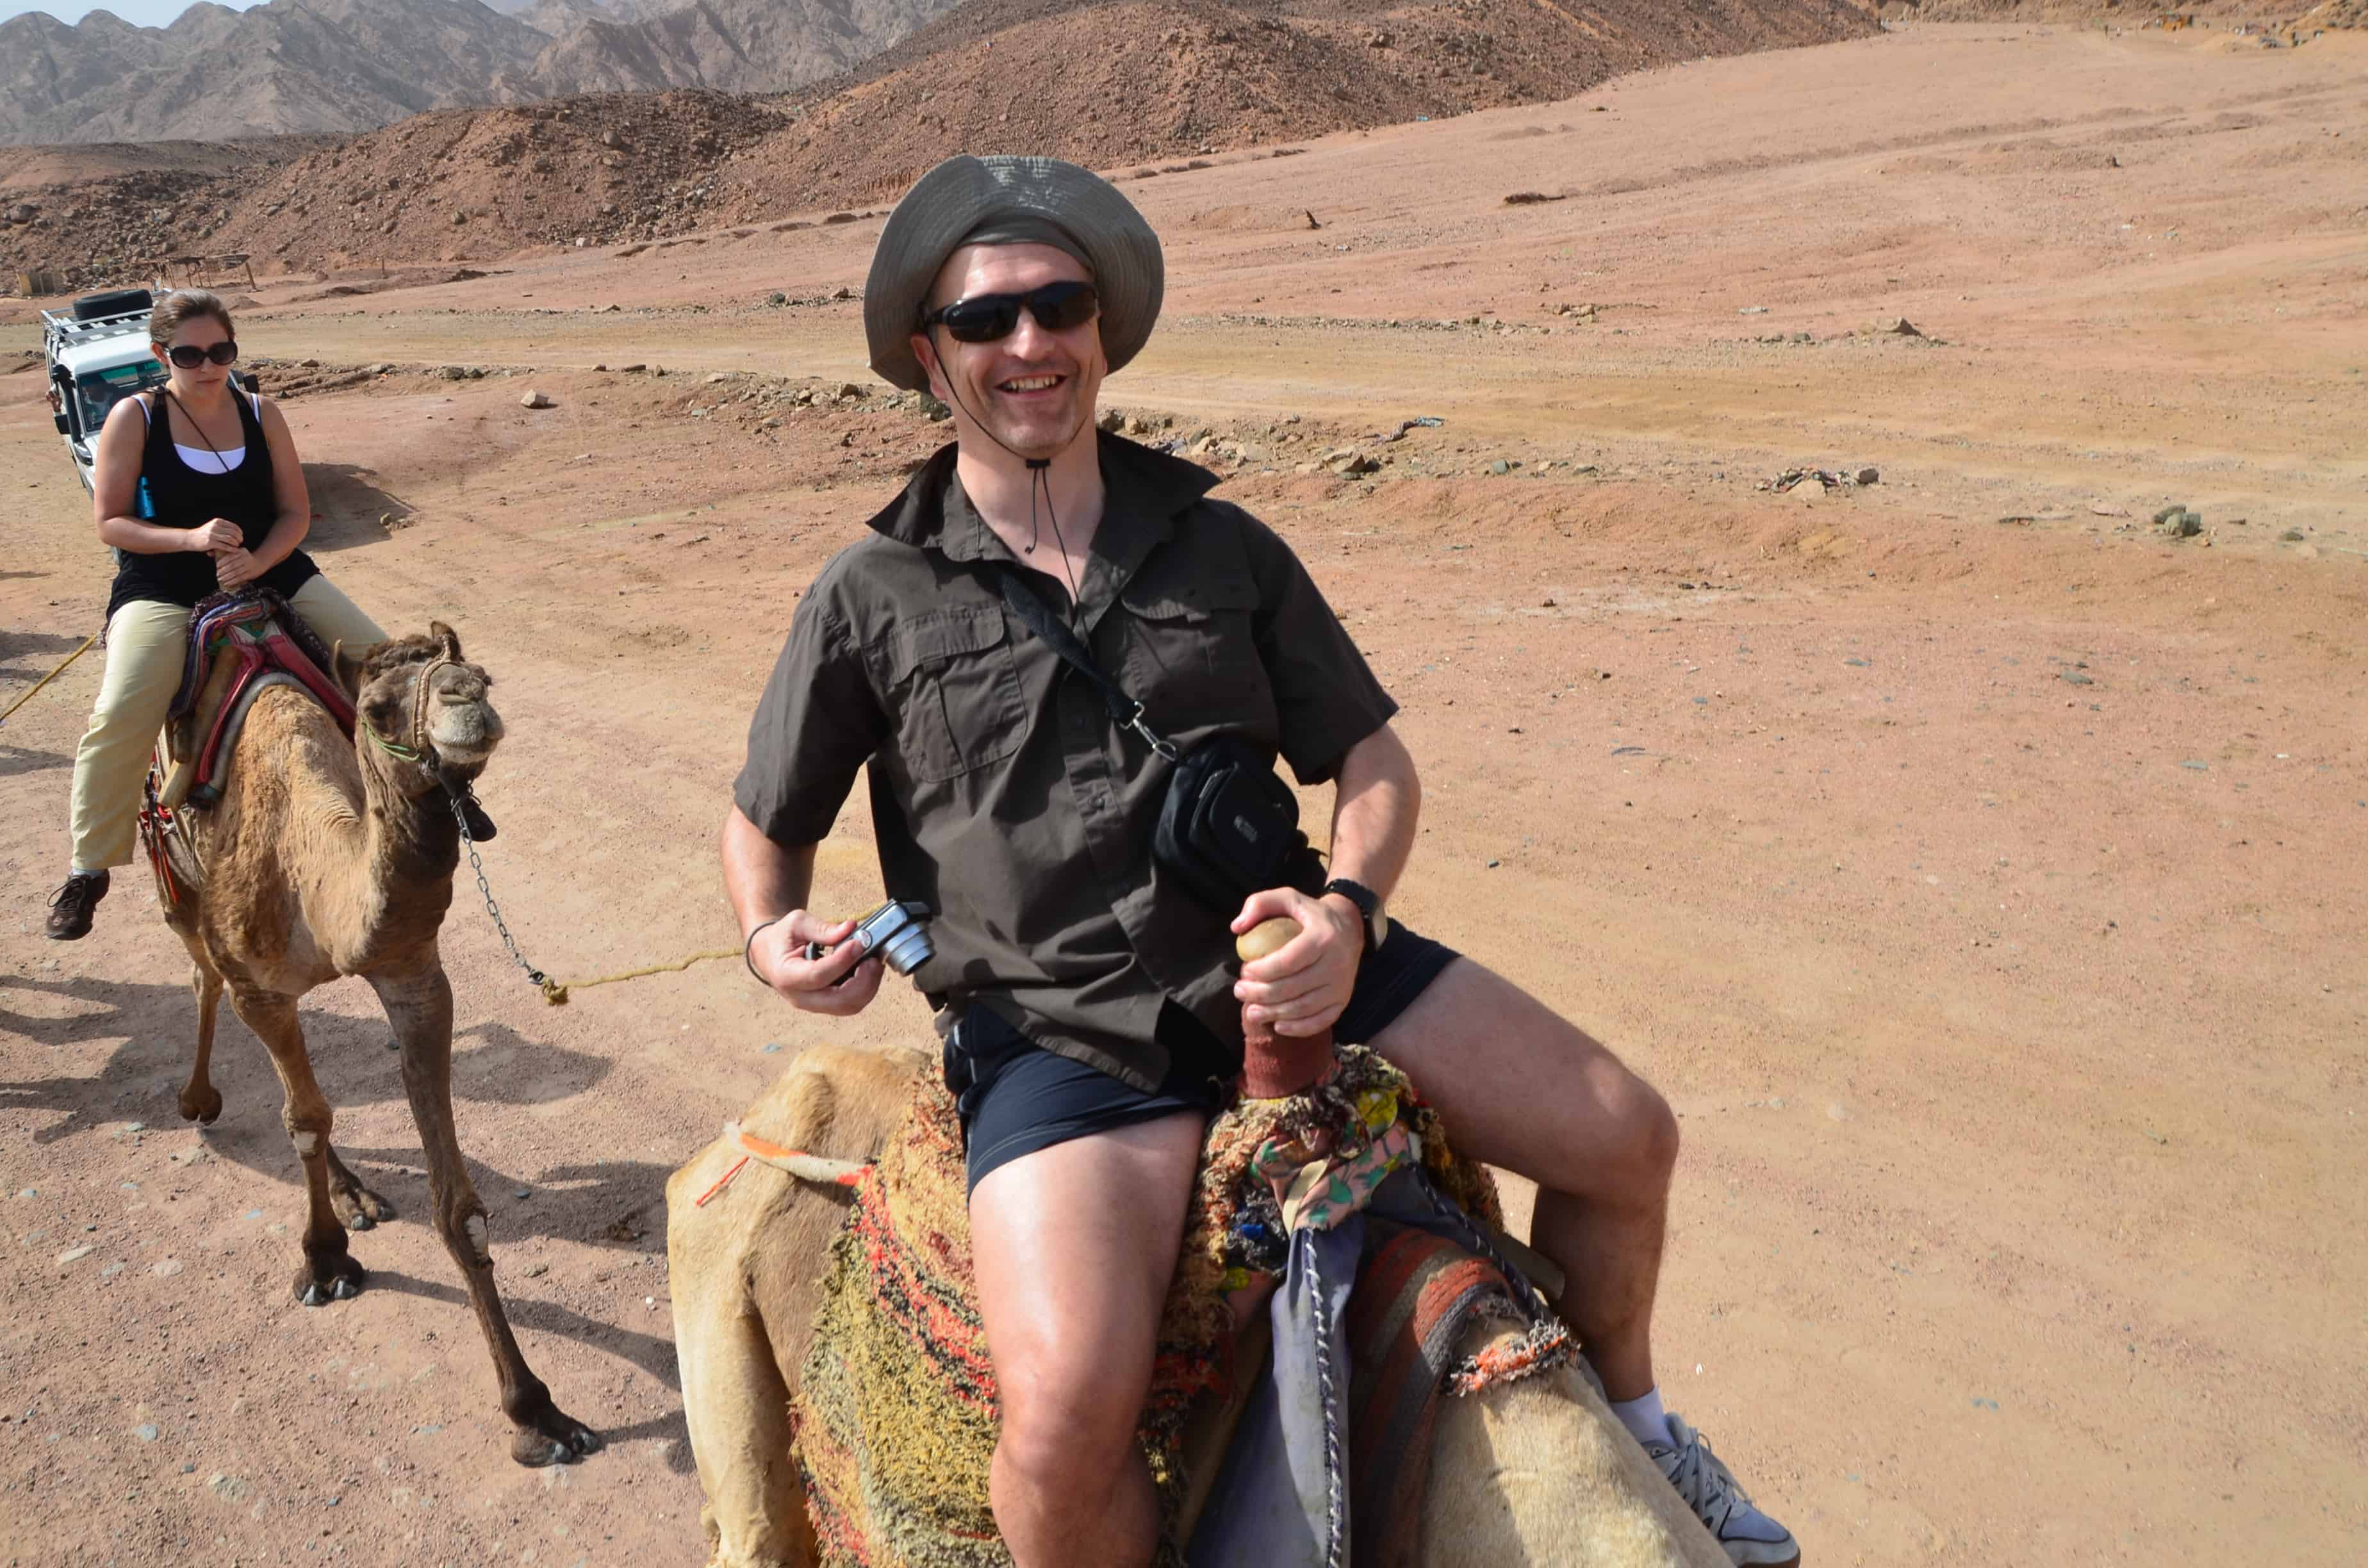 Martin on a camel at Abu Galom in Sinai, Egypt